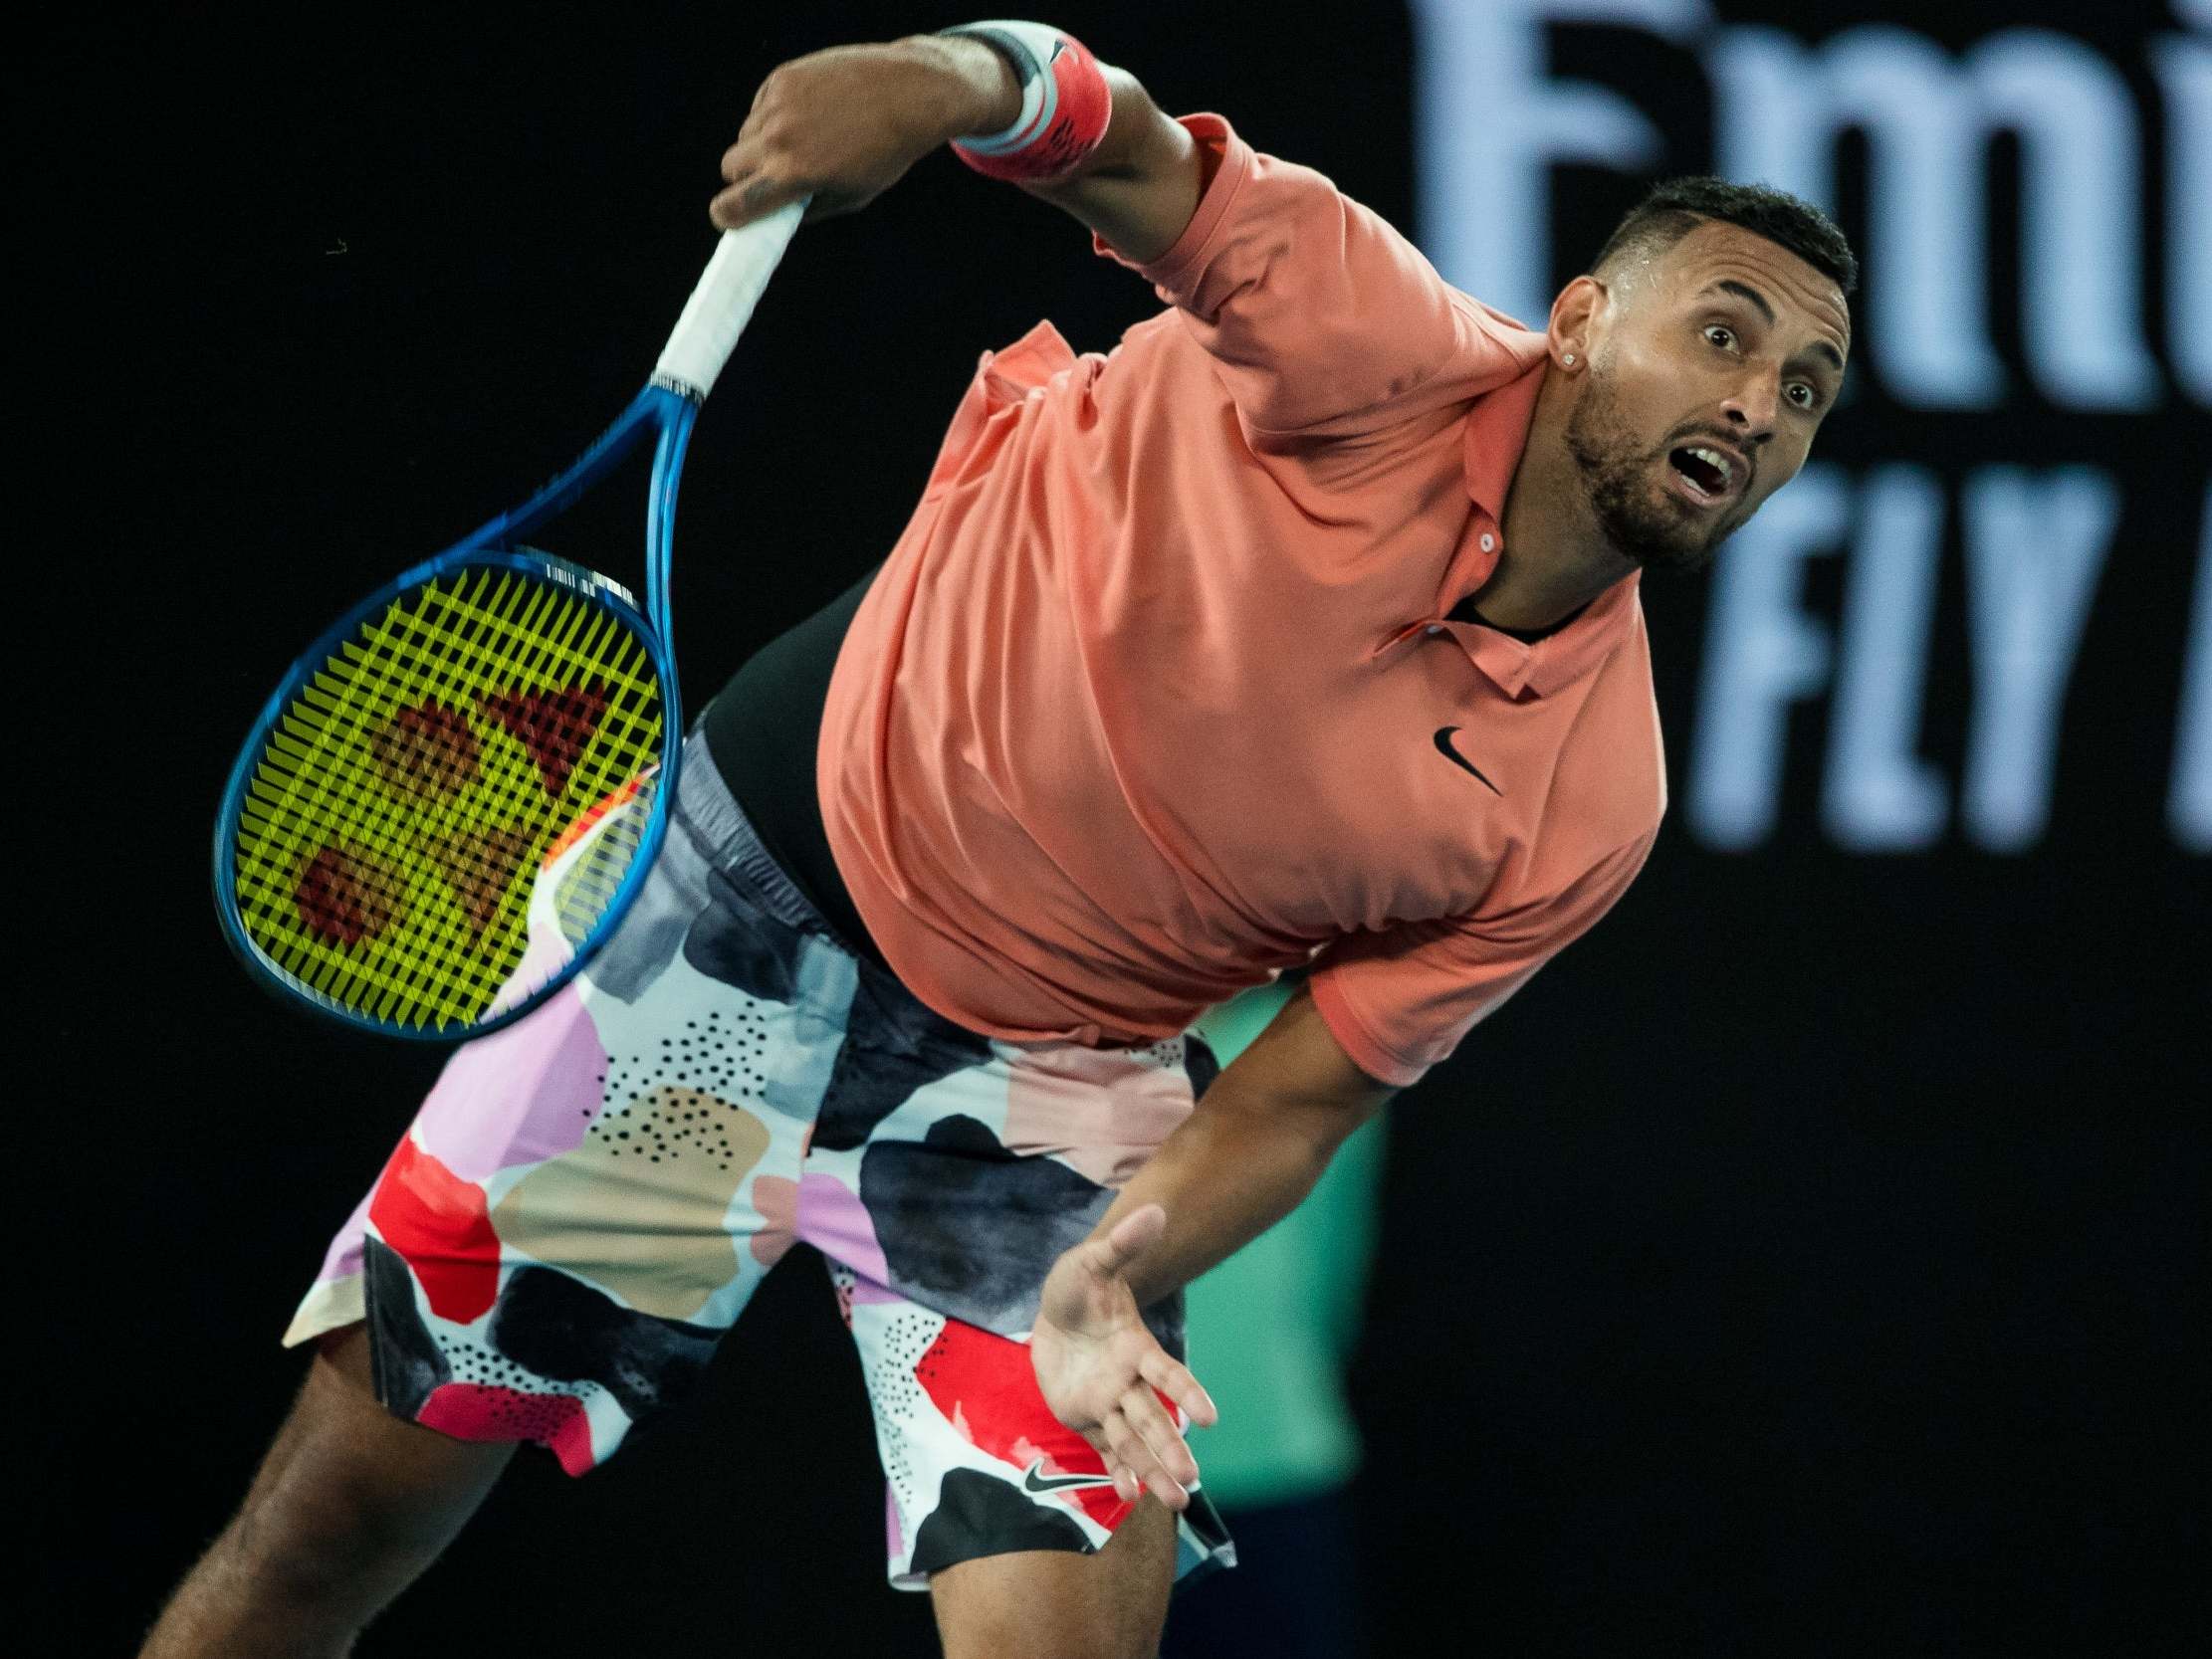 Nick Kyrgios was at his entertaining best but left empty-handed